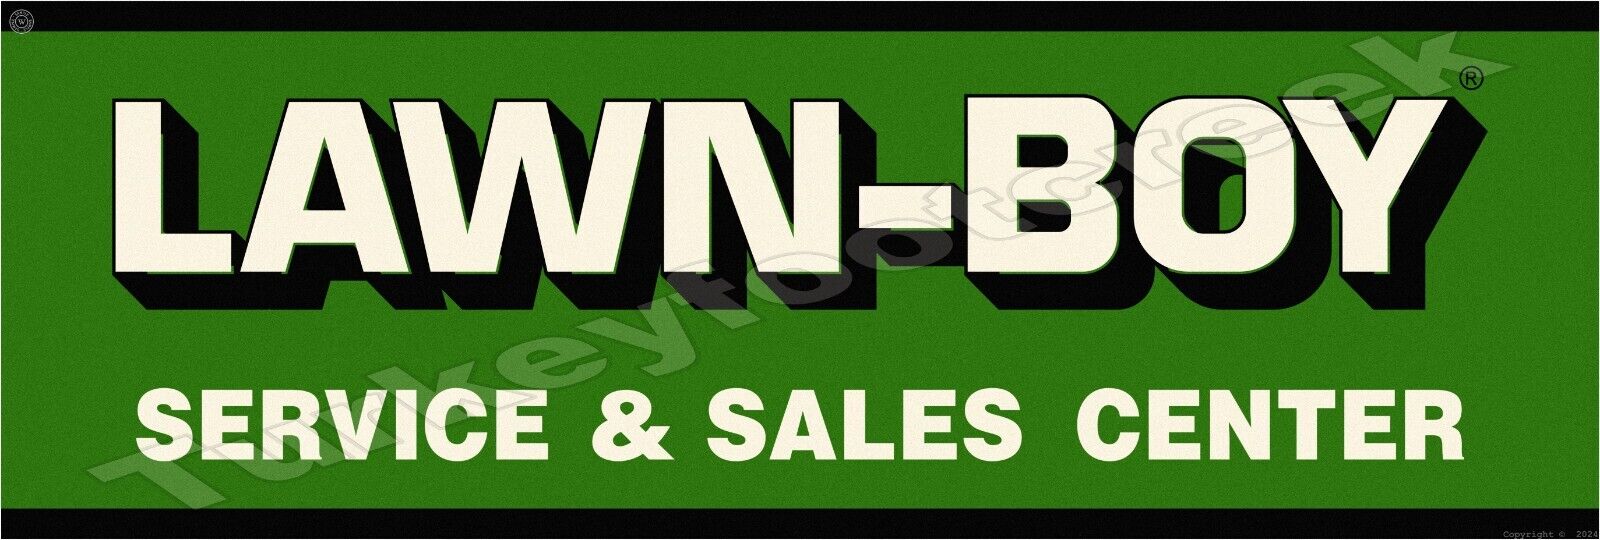 Lawn-Boy Sales & Service Center Metal Sign 2 Sizes to Choose From